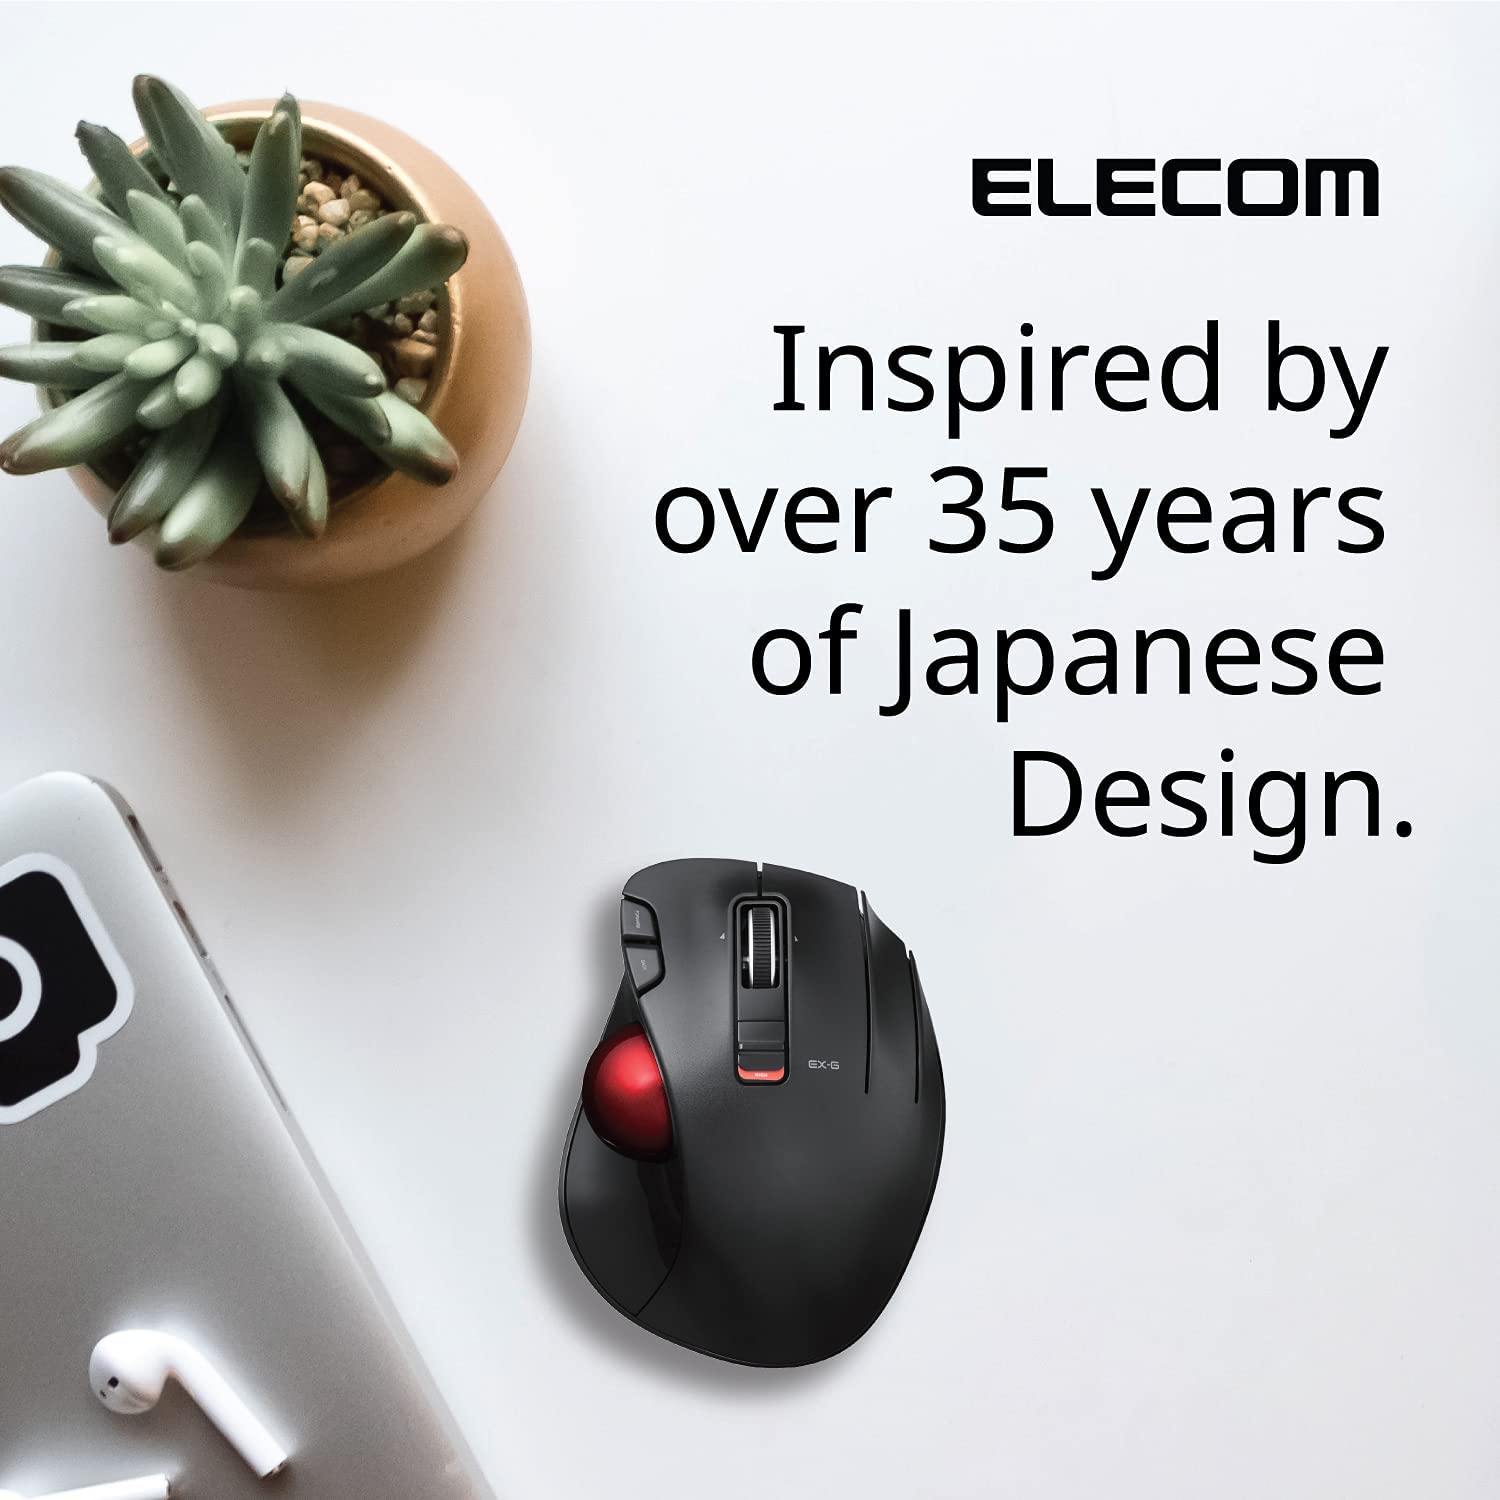 ELECOM 2.4GHz Wireless Thumb-Operated Trackball Mouse & Wired Japanese Layout Keyboard with Built-in Optical Trackball Mouse & Scroll Wheel (M-XT3DRBK-G & TK-TB01UMBK)